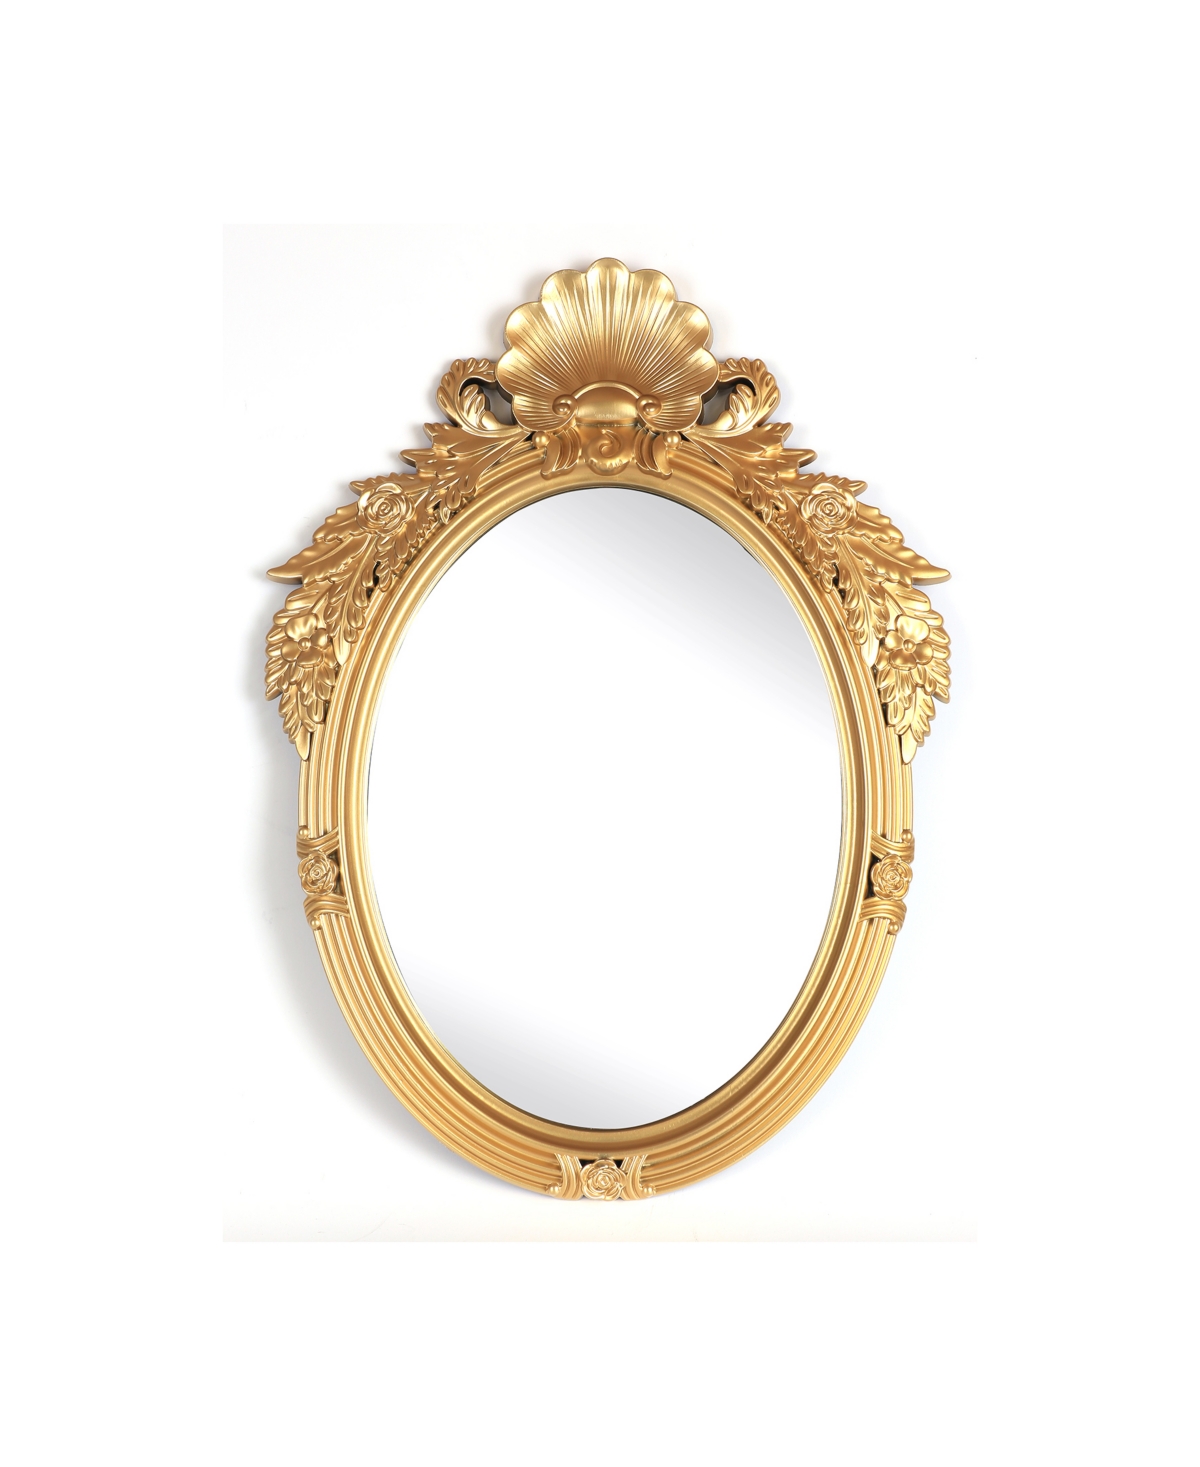 Mirrorize Canada Oval Antique-like Metal Framed Wall Mirror, 35" X 26" In Gold